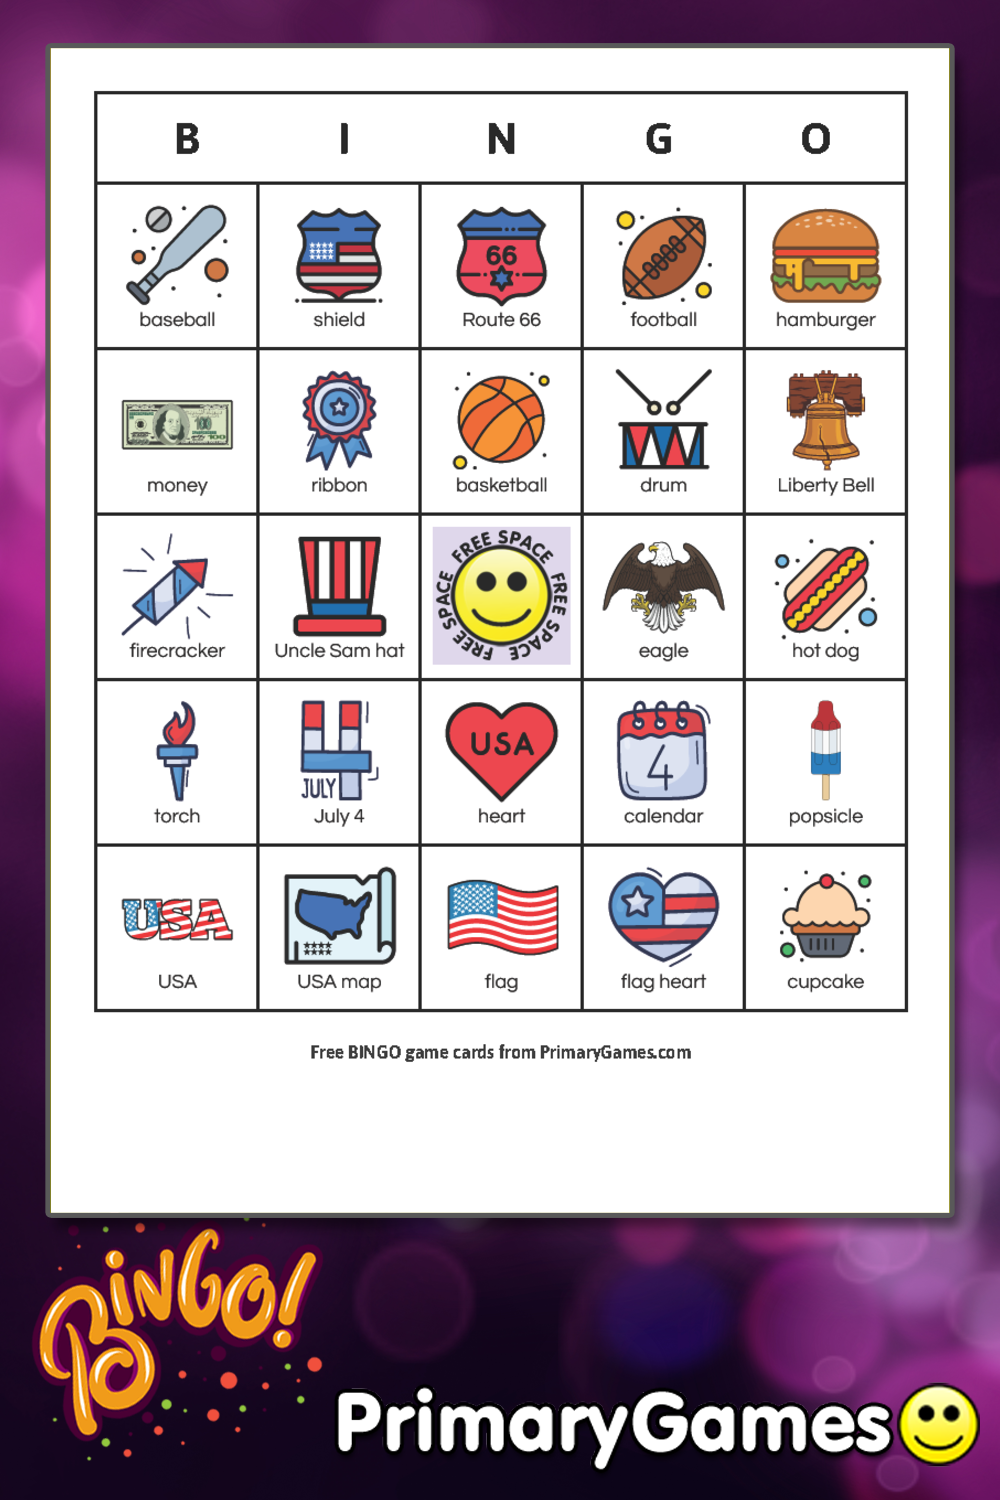 Summer BINGO Game Card • FREE Printable Game from PrimaryGames